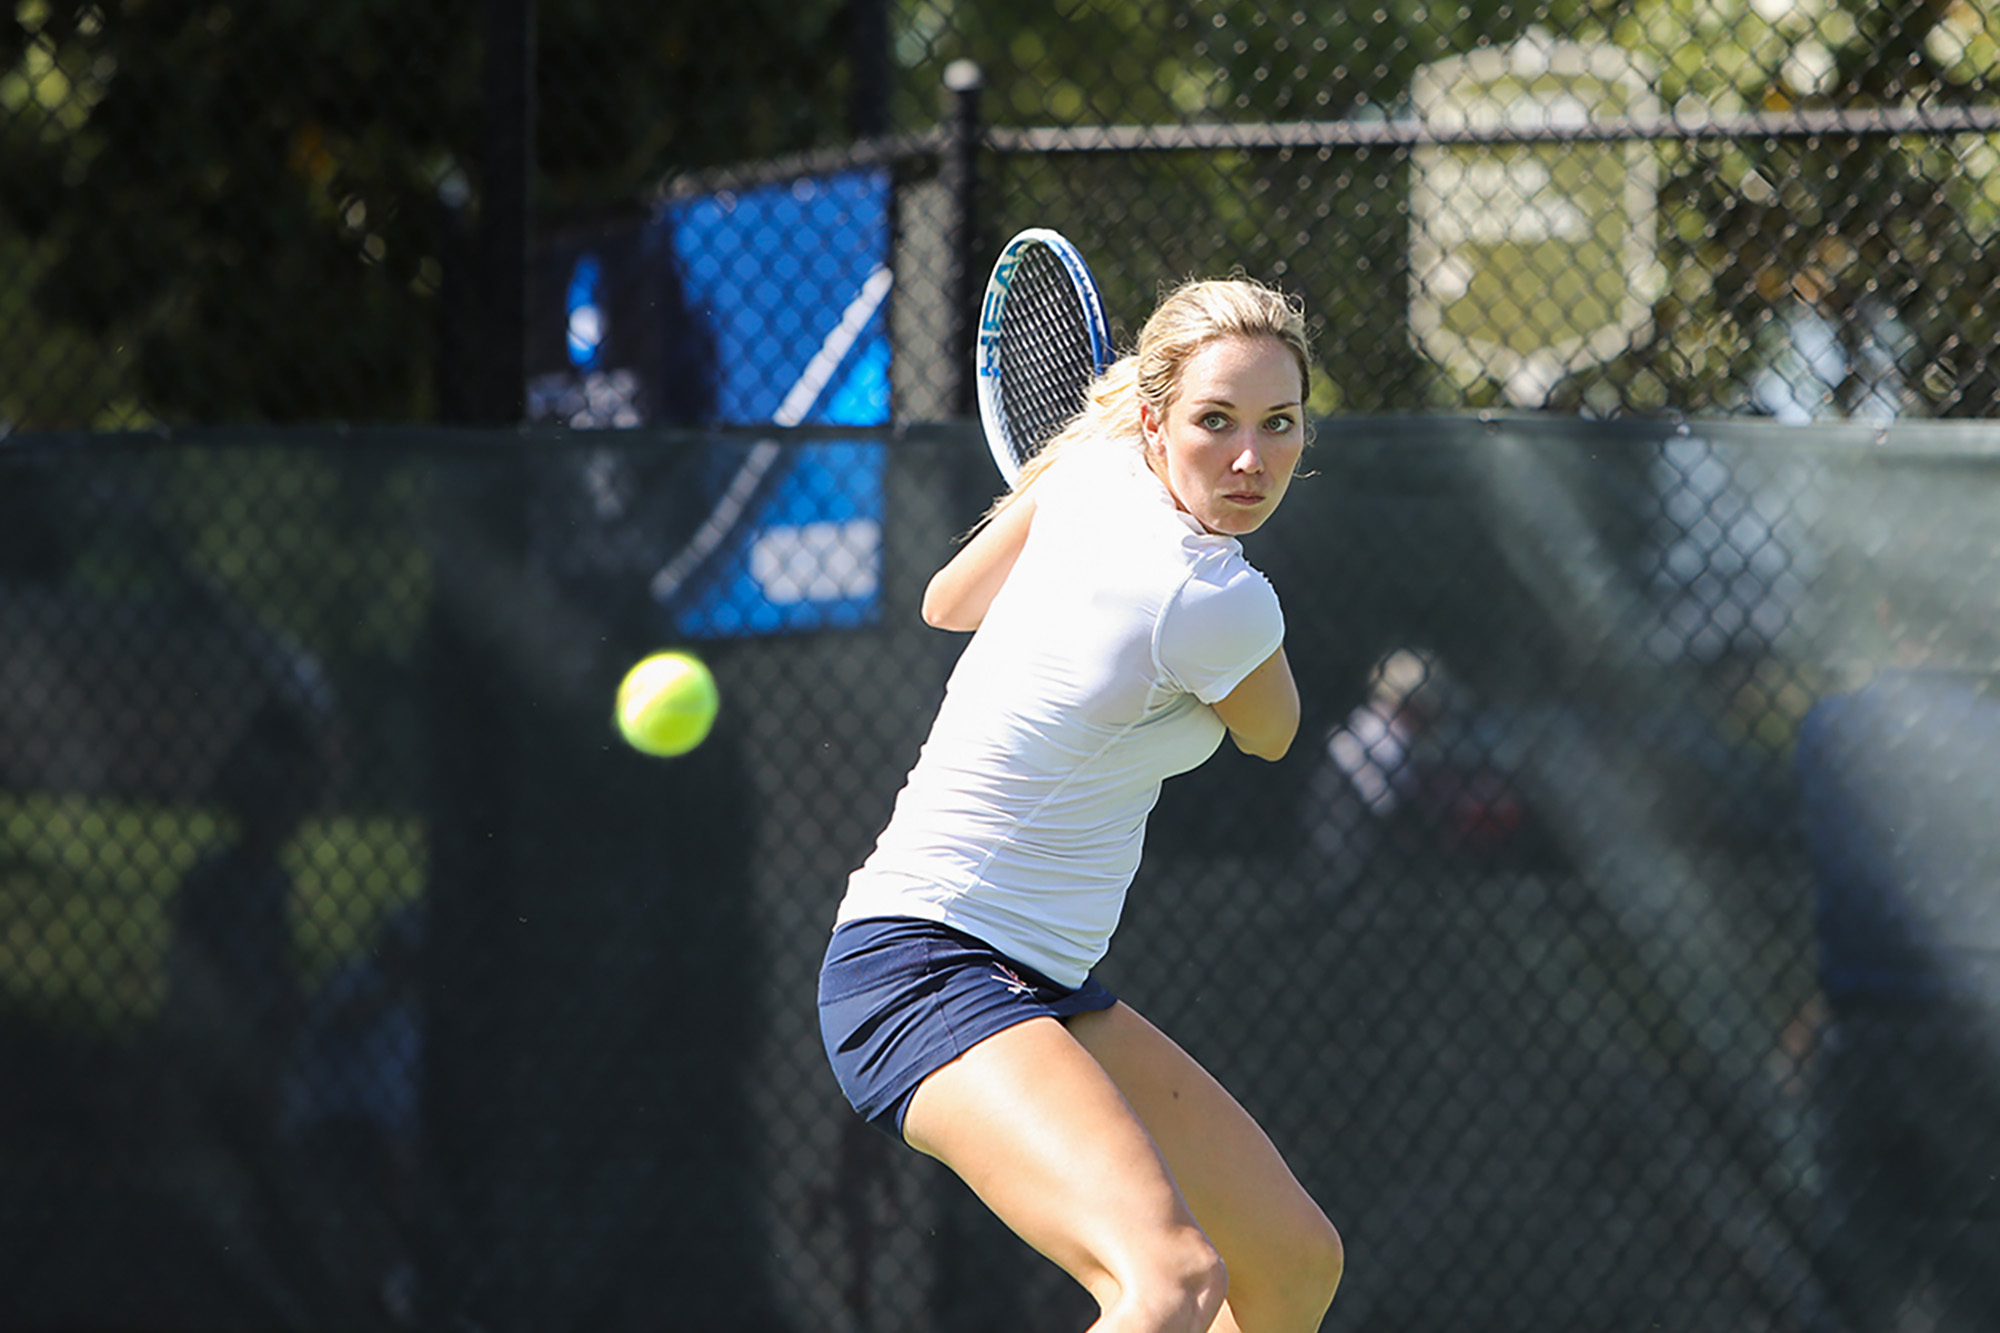 Danielle Collins about to hit a tennis ball during a match